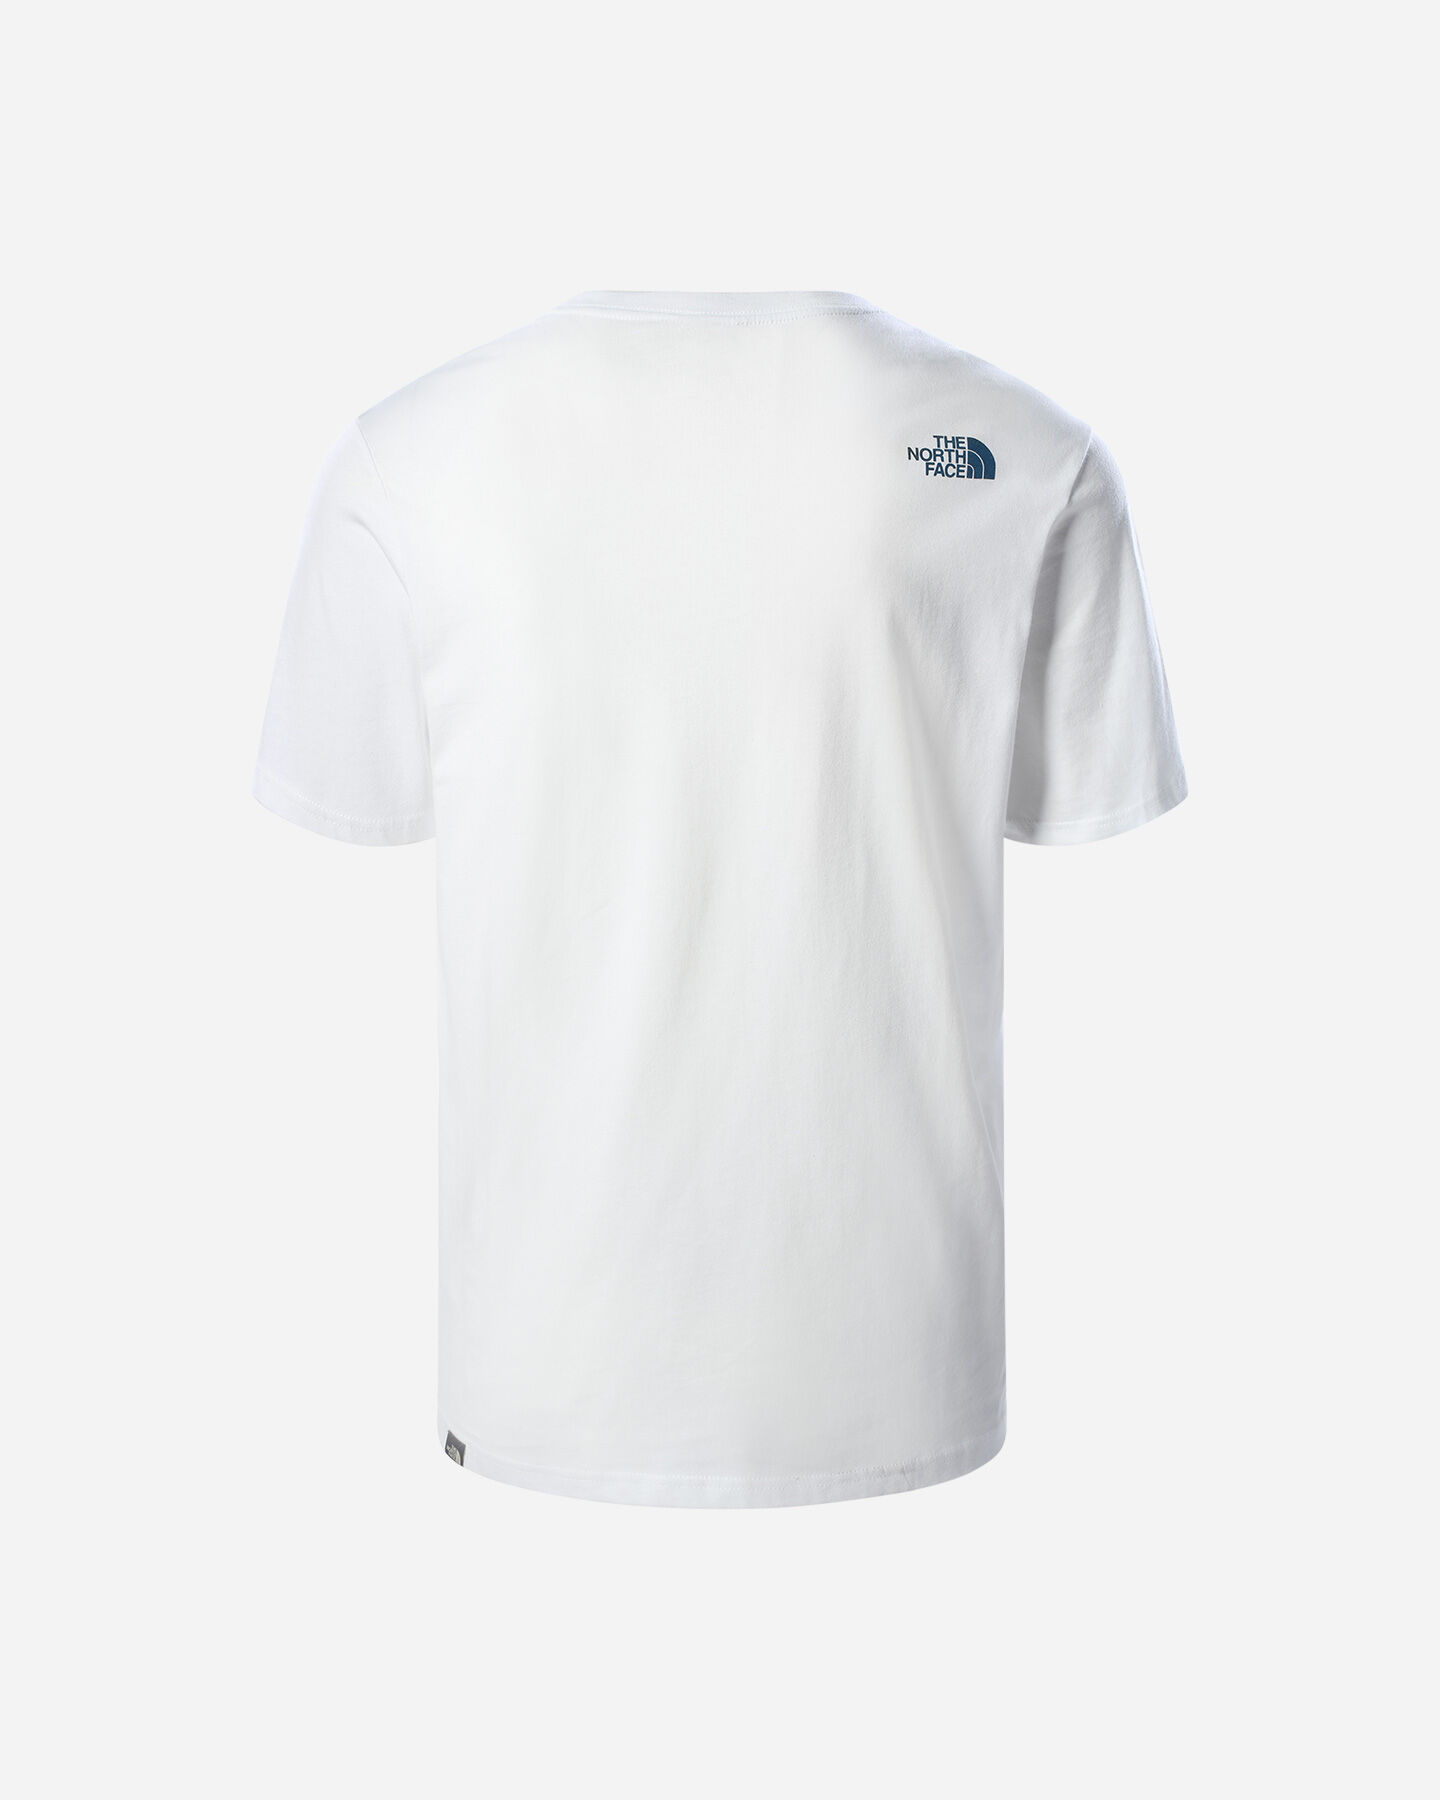  T-Shirt THE NORTH FACE CAMPAY BIG LOGO M S5296496|FN4|XS scatto 1